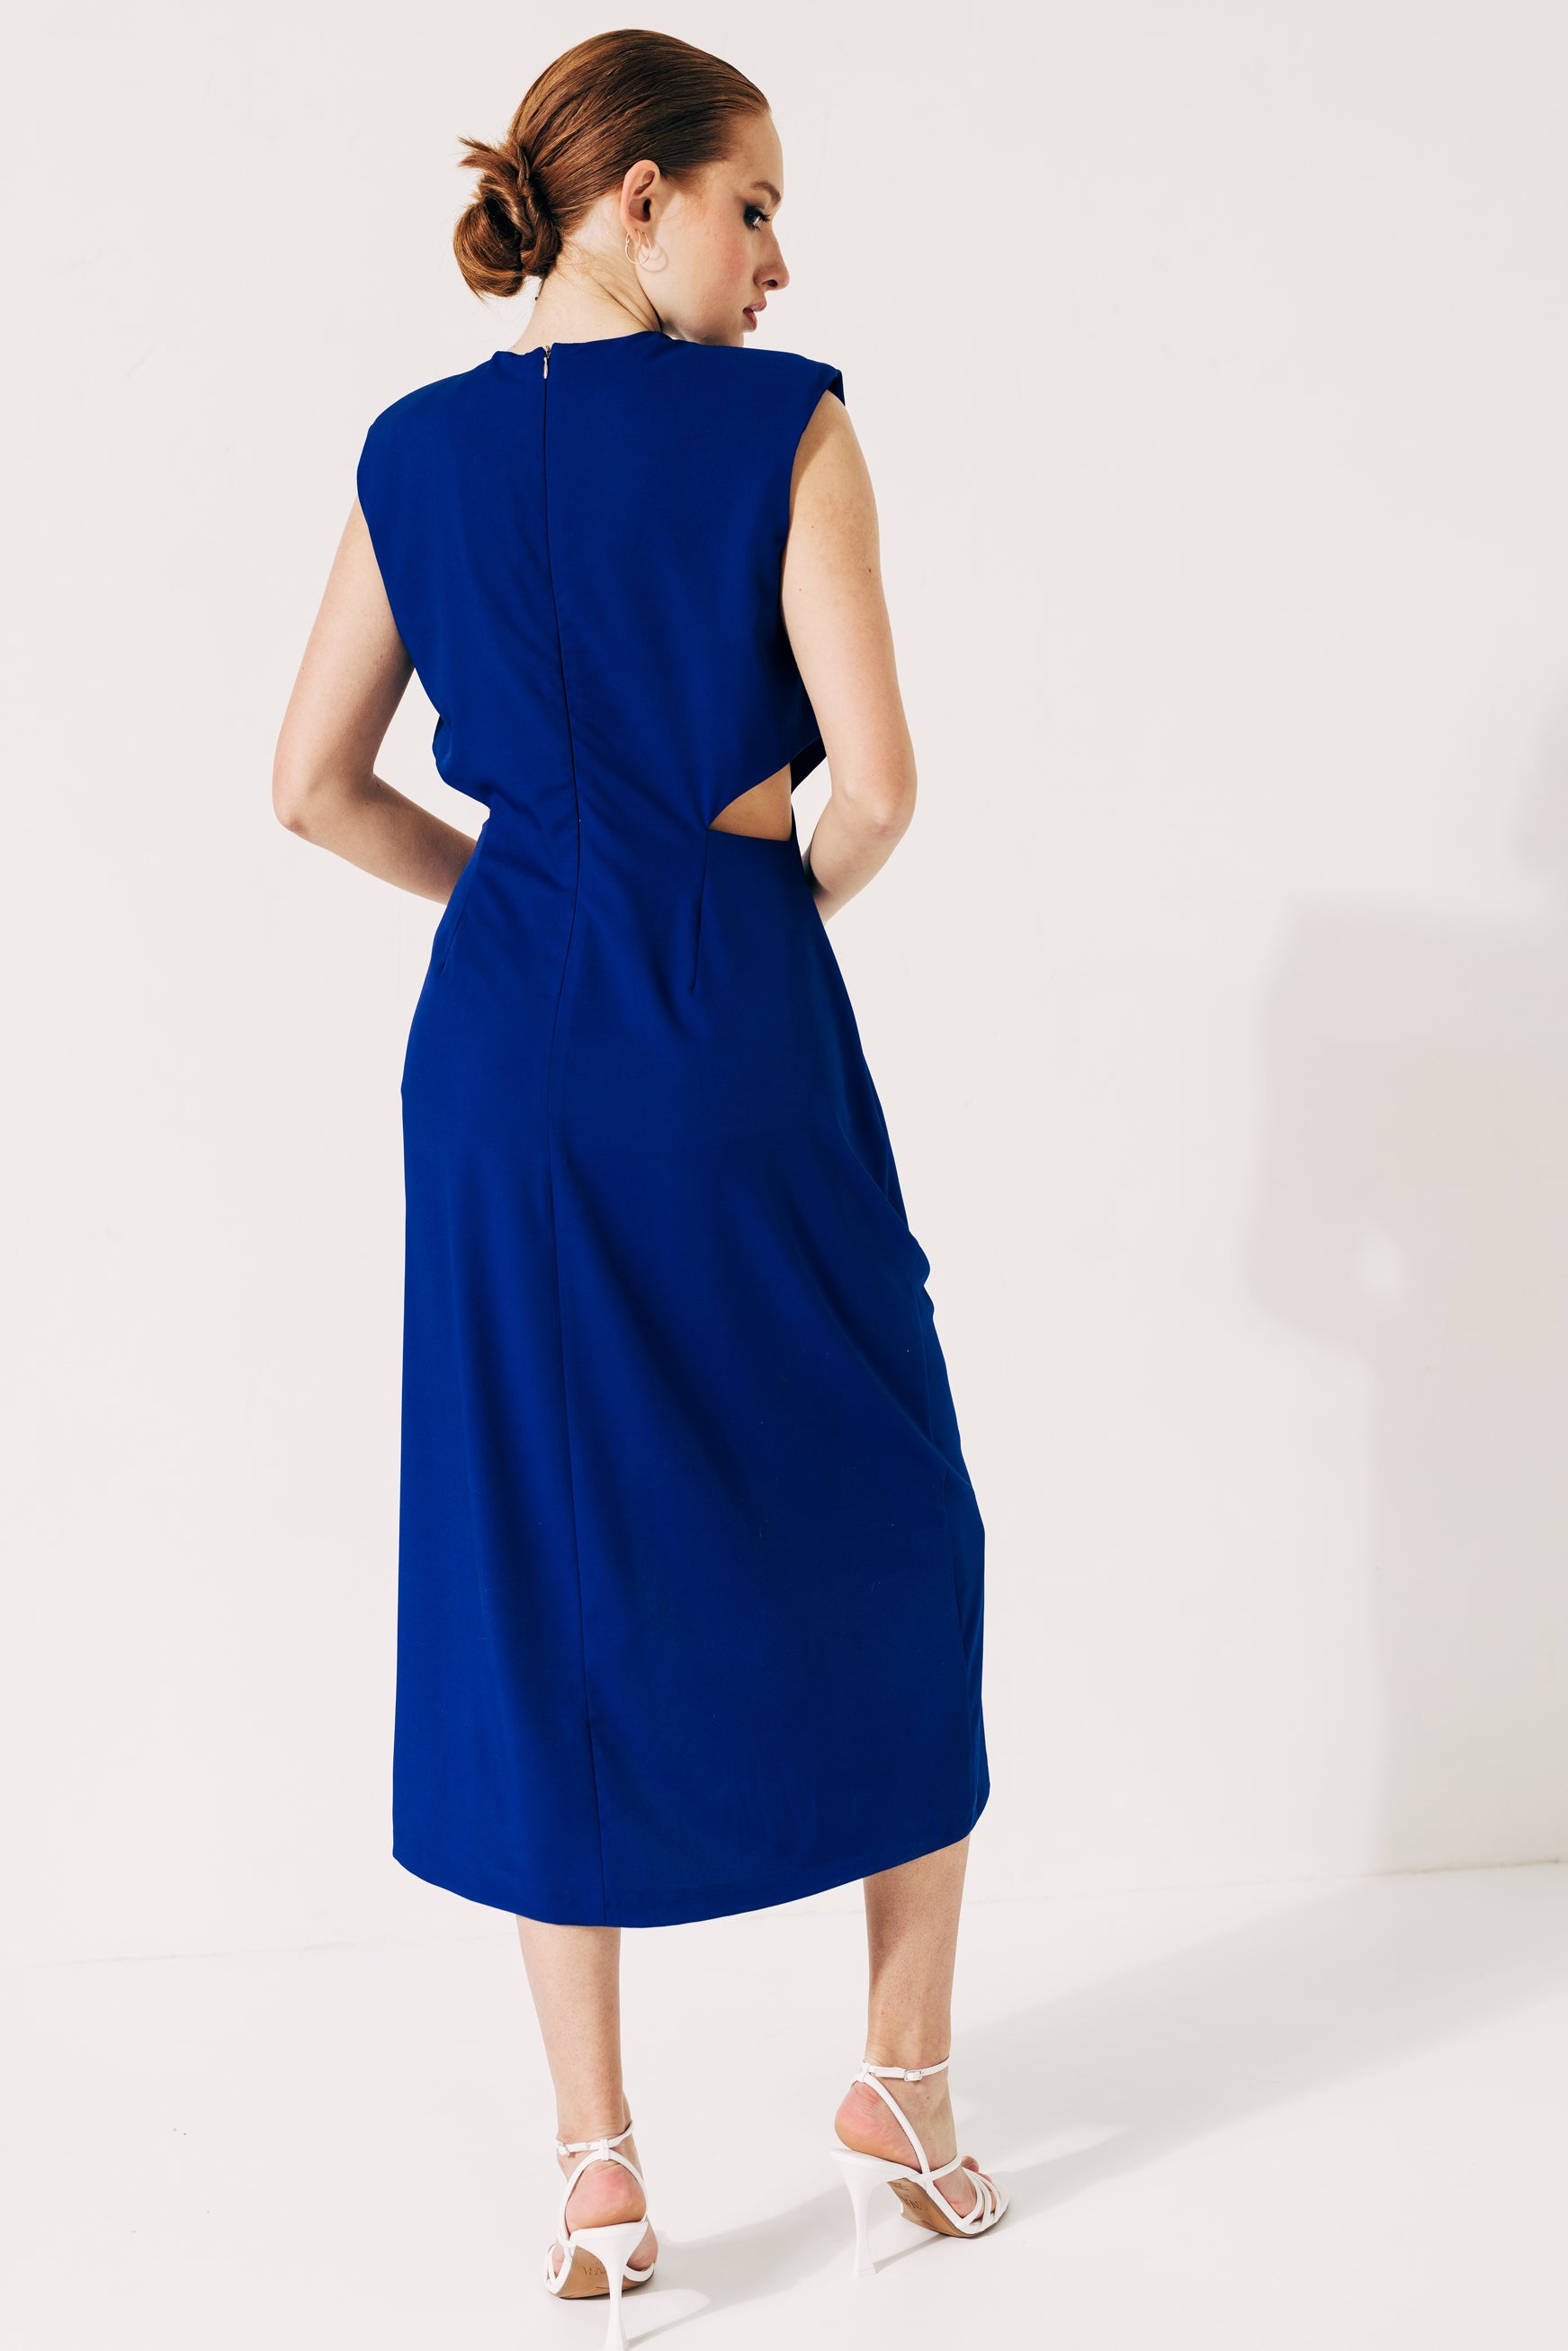 Midi dress with cut-out detail